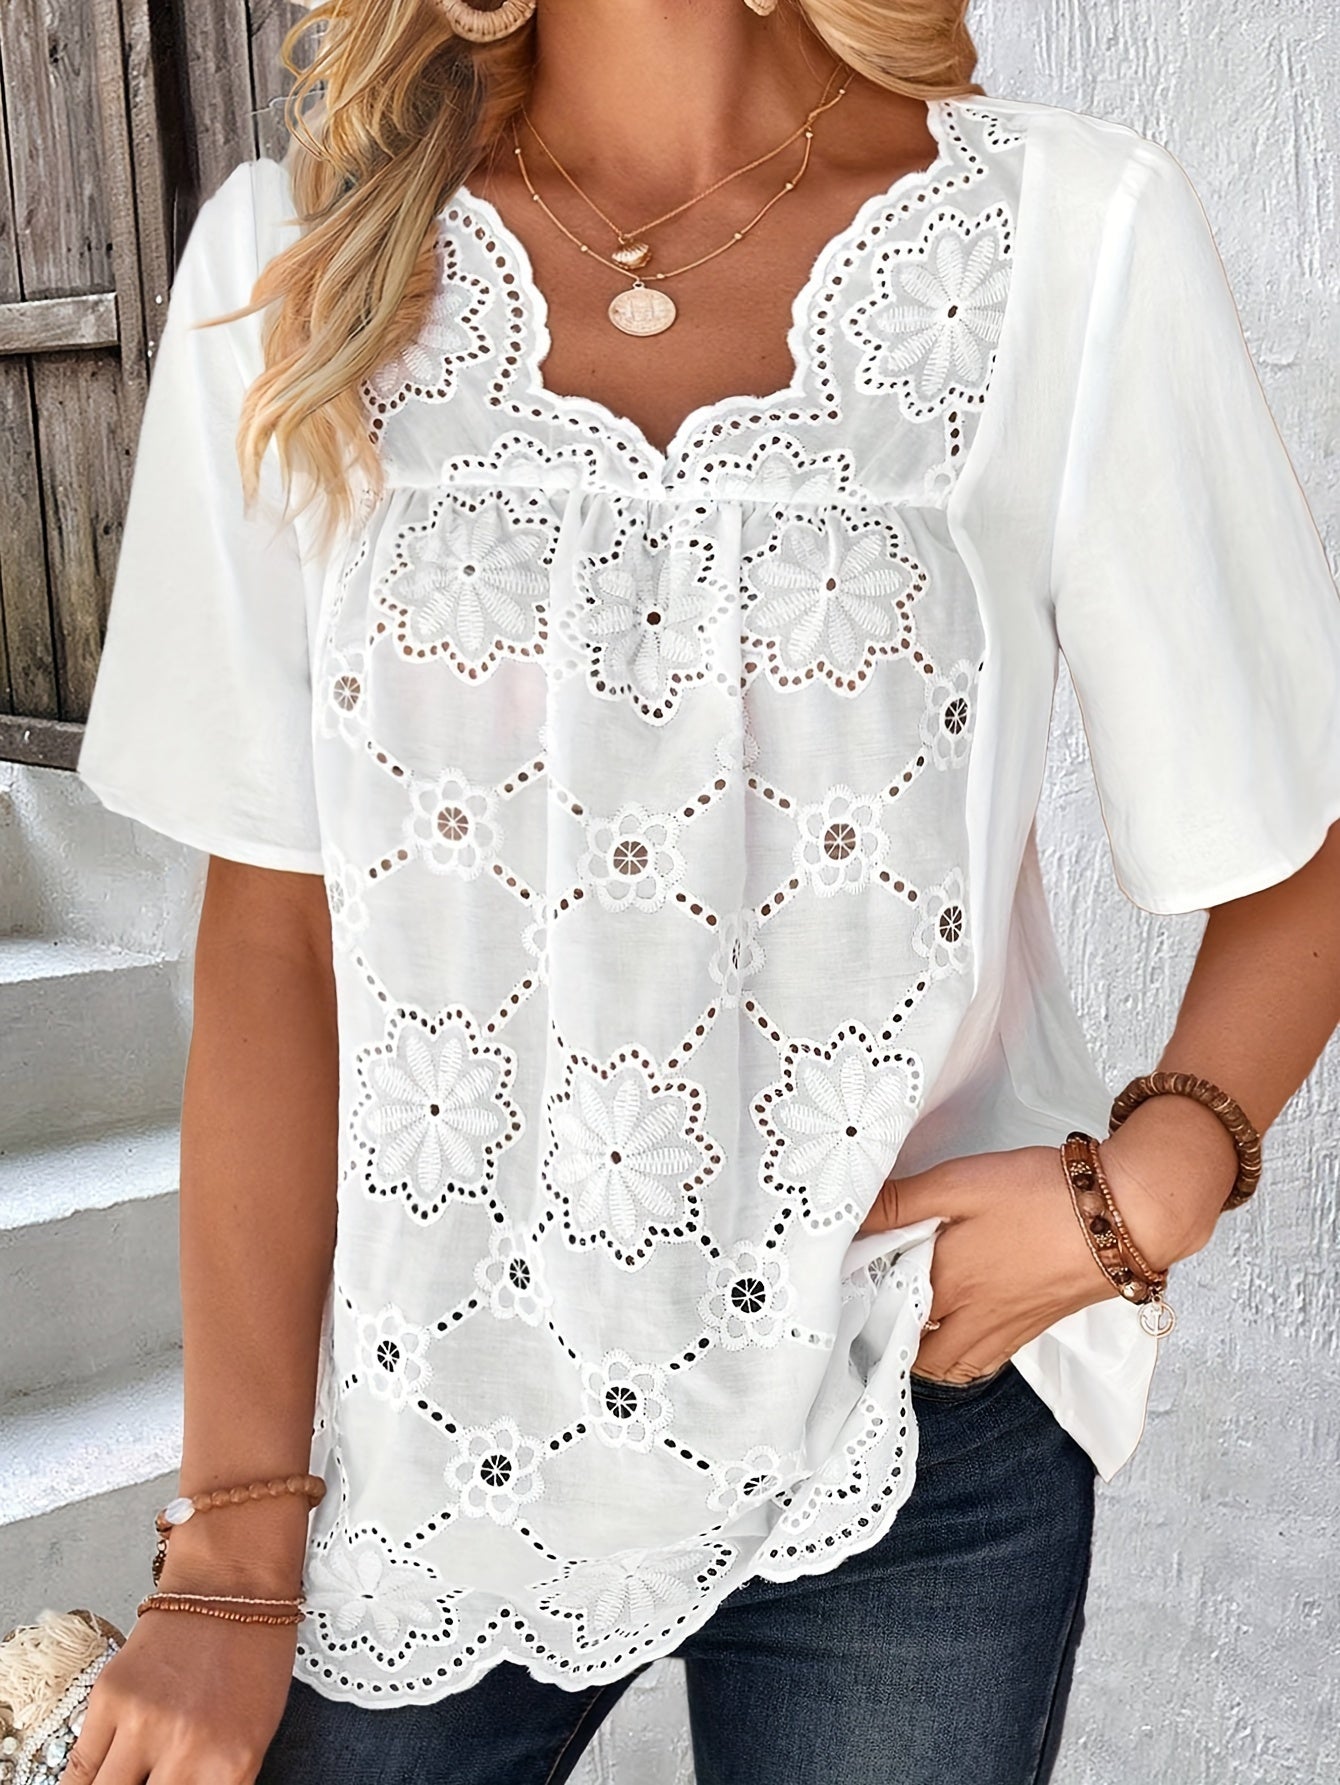 Lace Elegant Short Sleeve Top For Spring & Summer, Women's Clothing